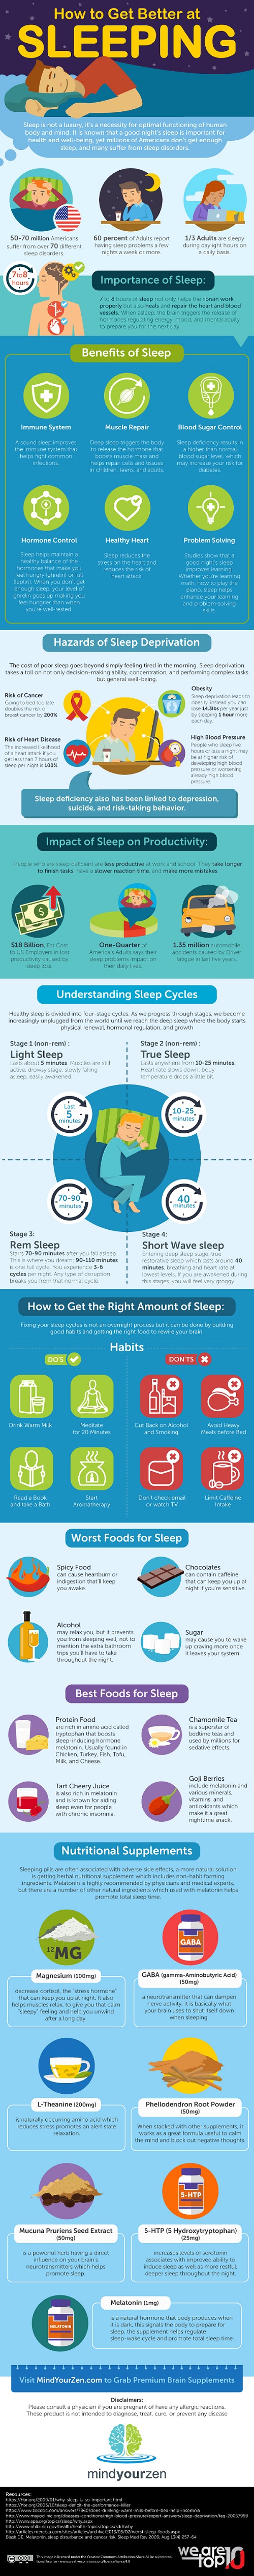 How-To-Get-Better-at-Sleeping